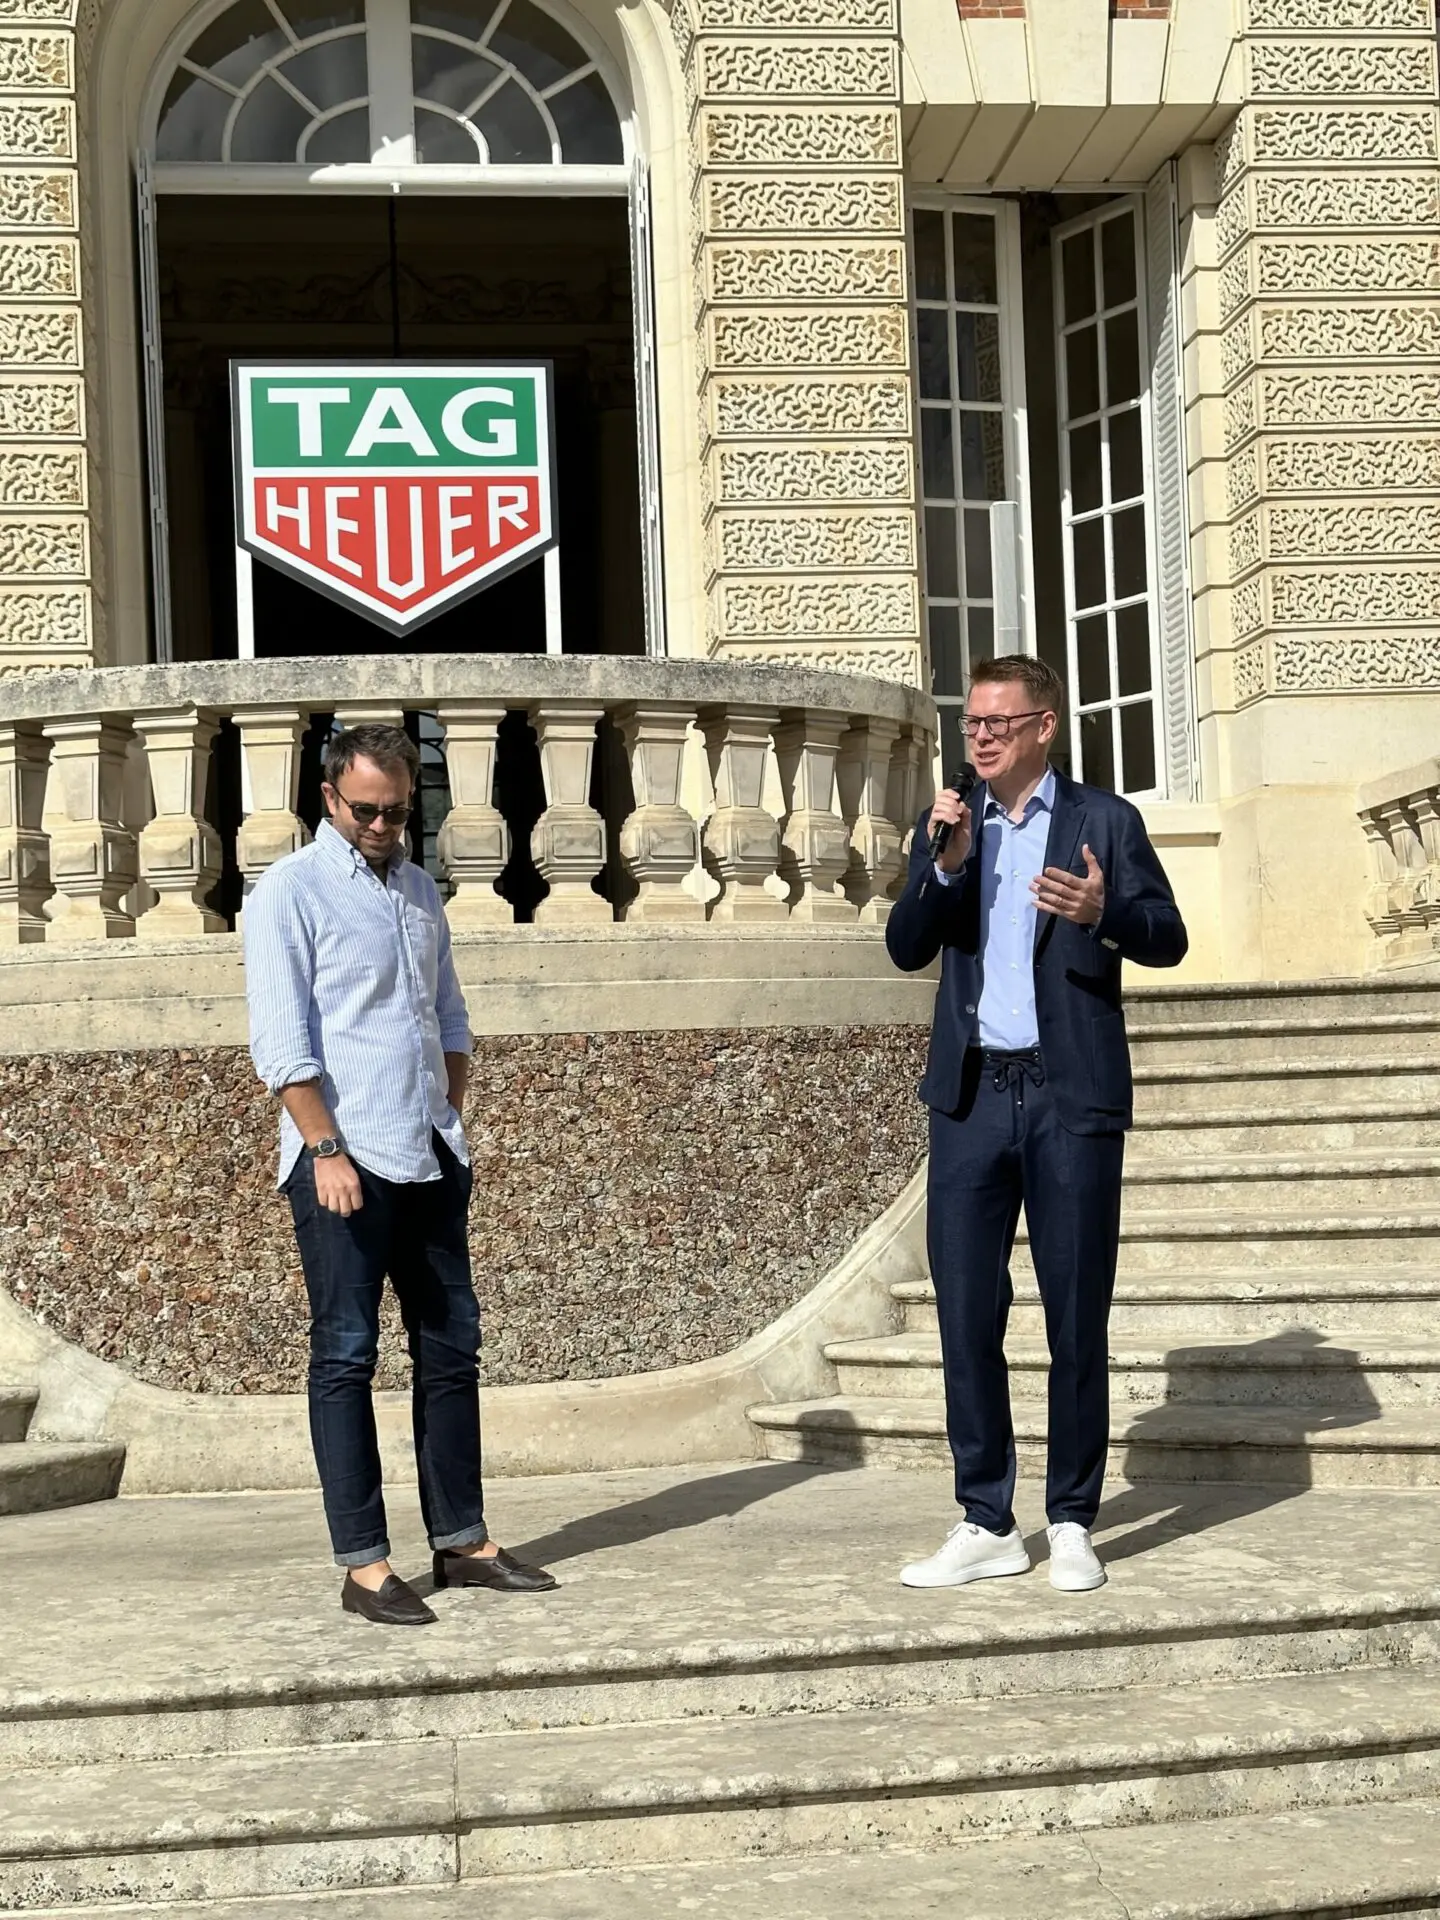 TAG Heuer - A few pics of the Tag Heuer event yesterday in Paris